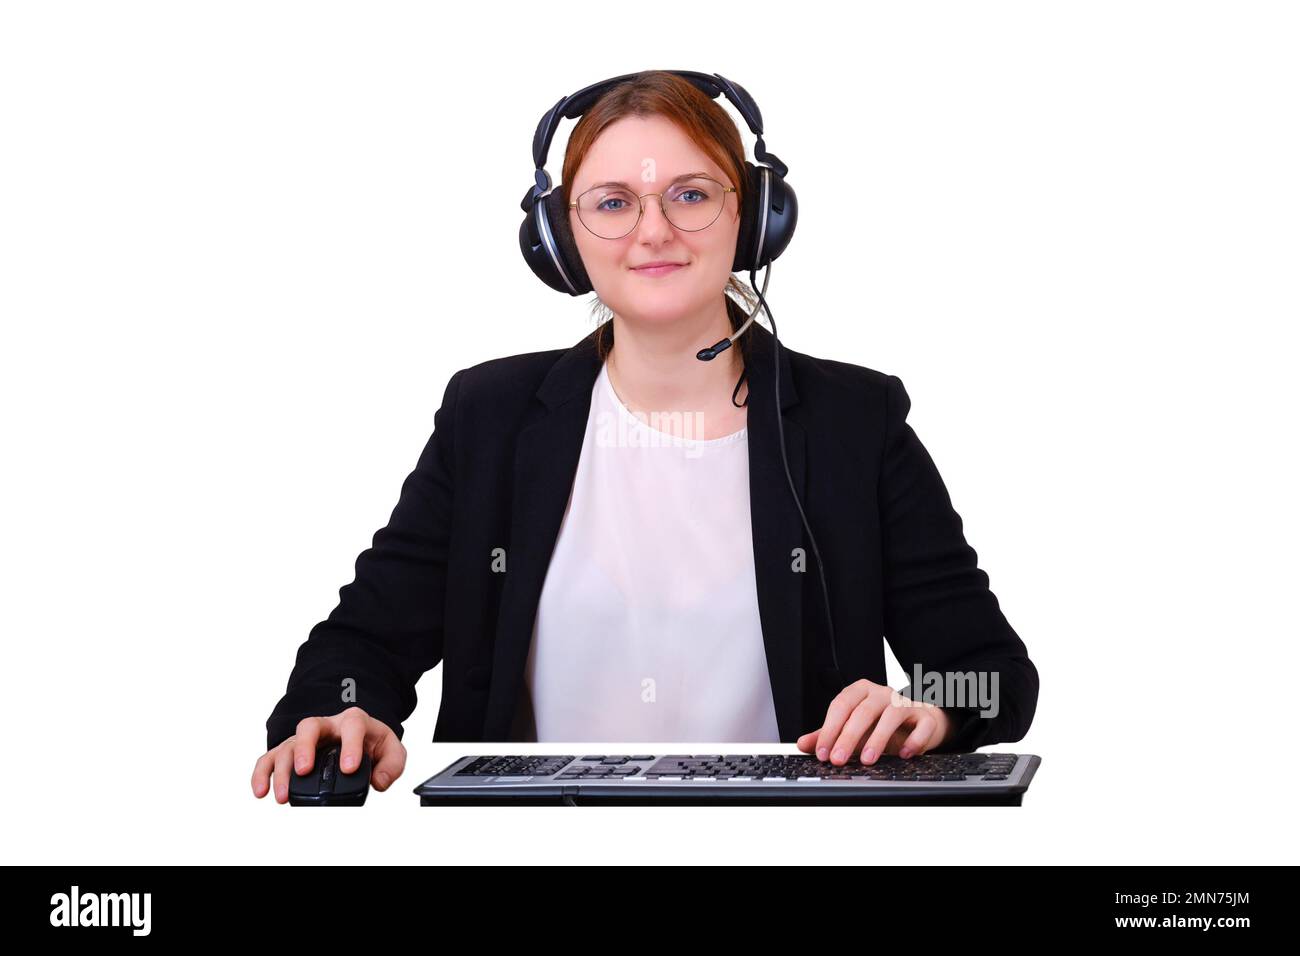 View through a computer camera during an online video call, isolated on a white background. Business woman in the Internet conference when working rem Stock Photo